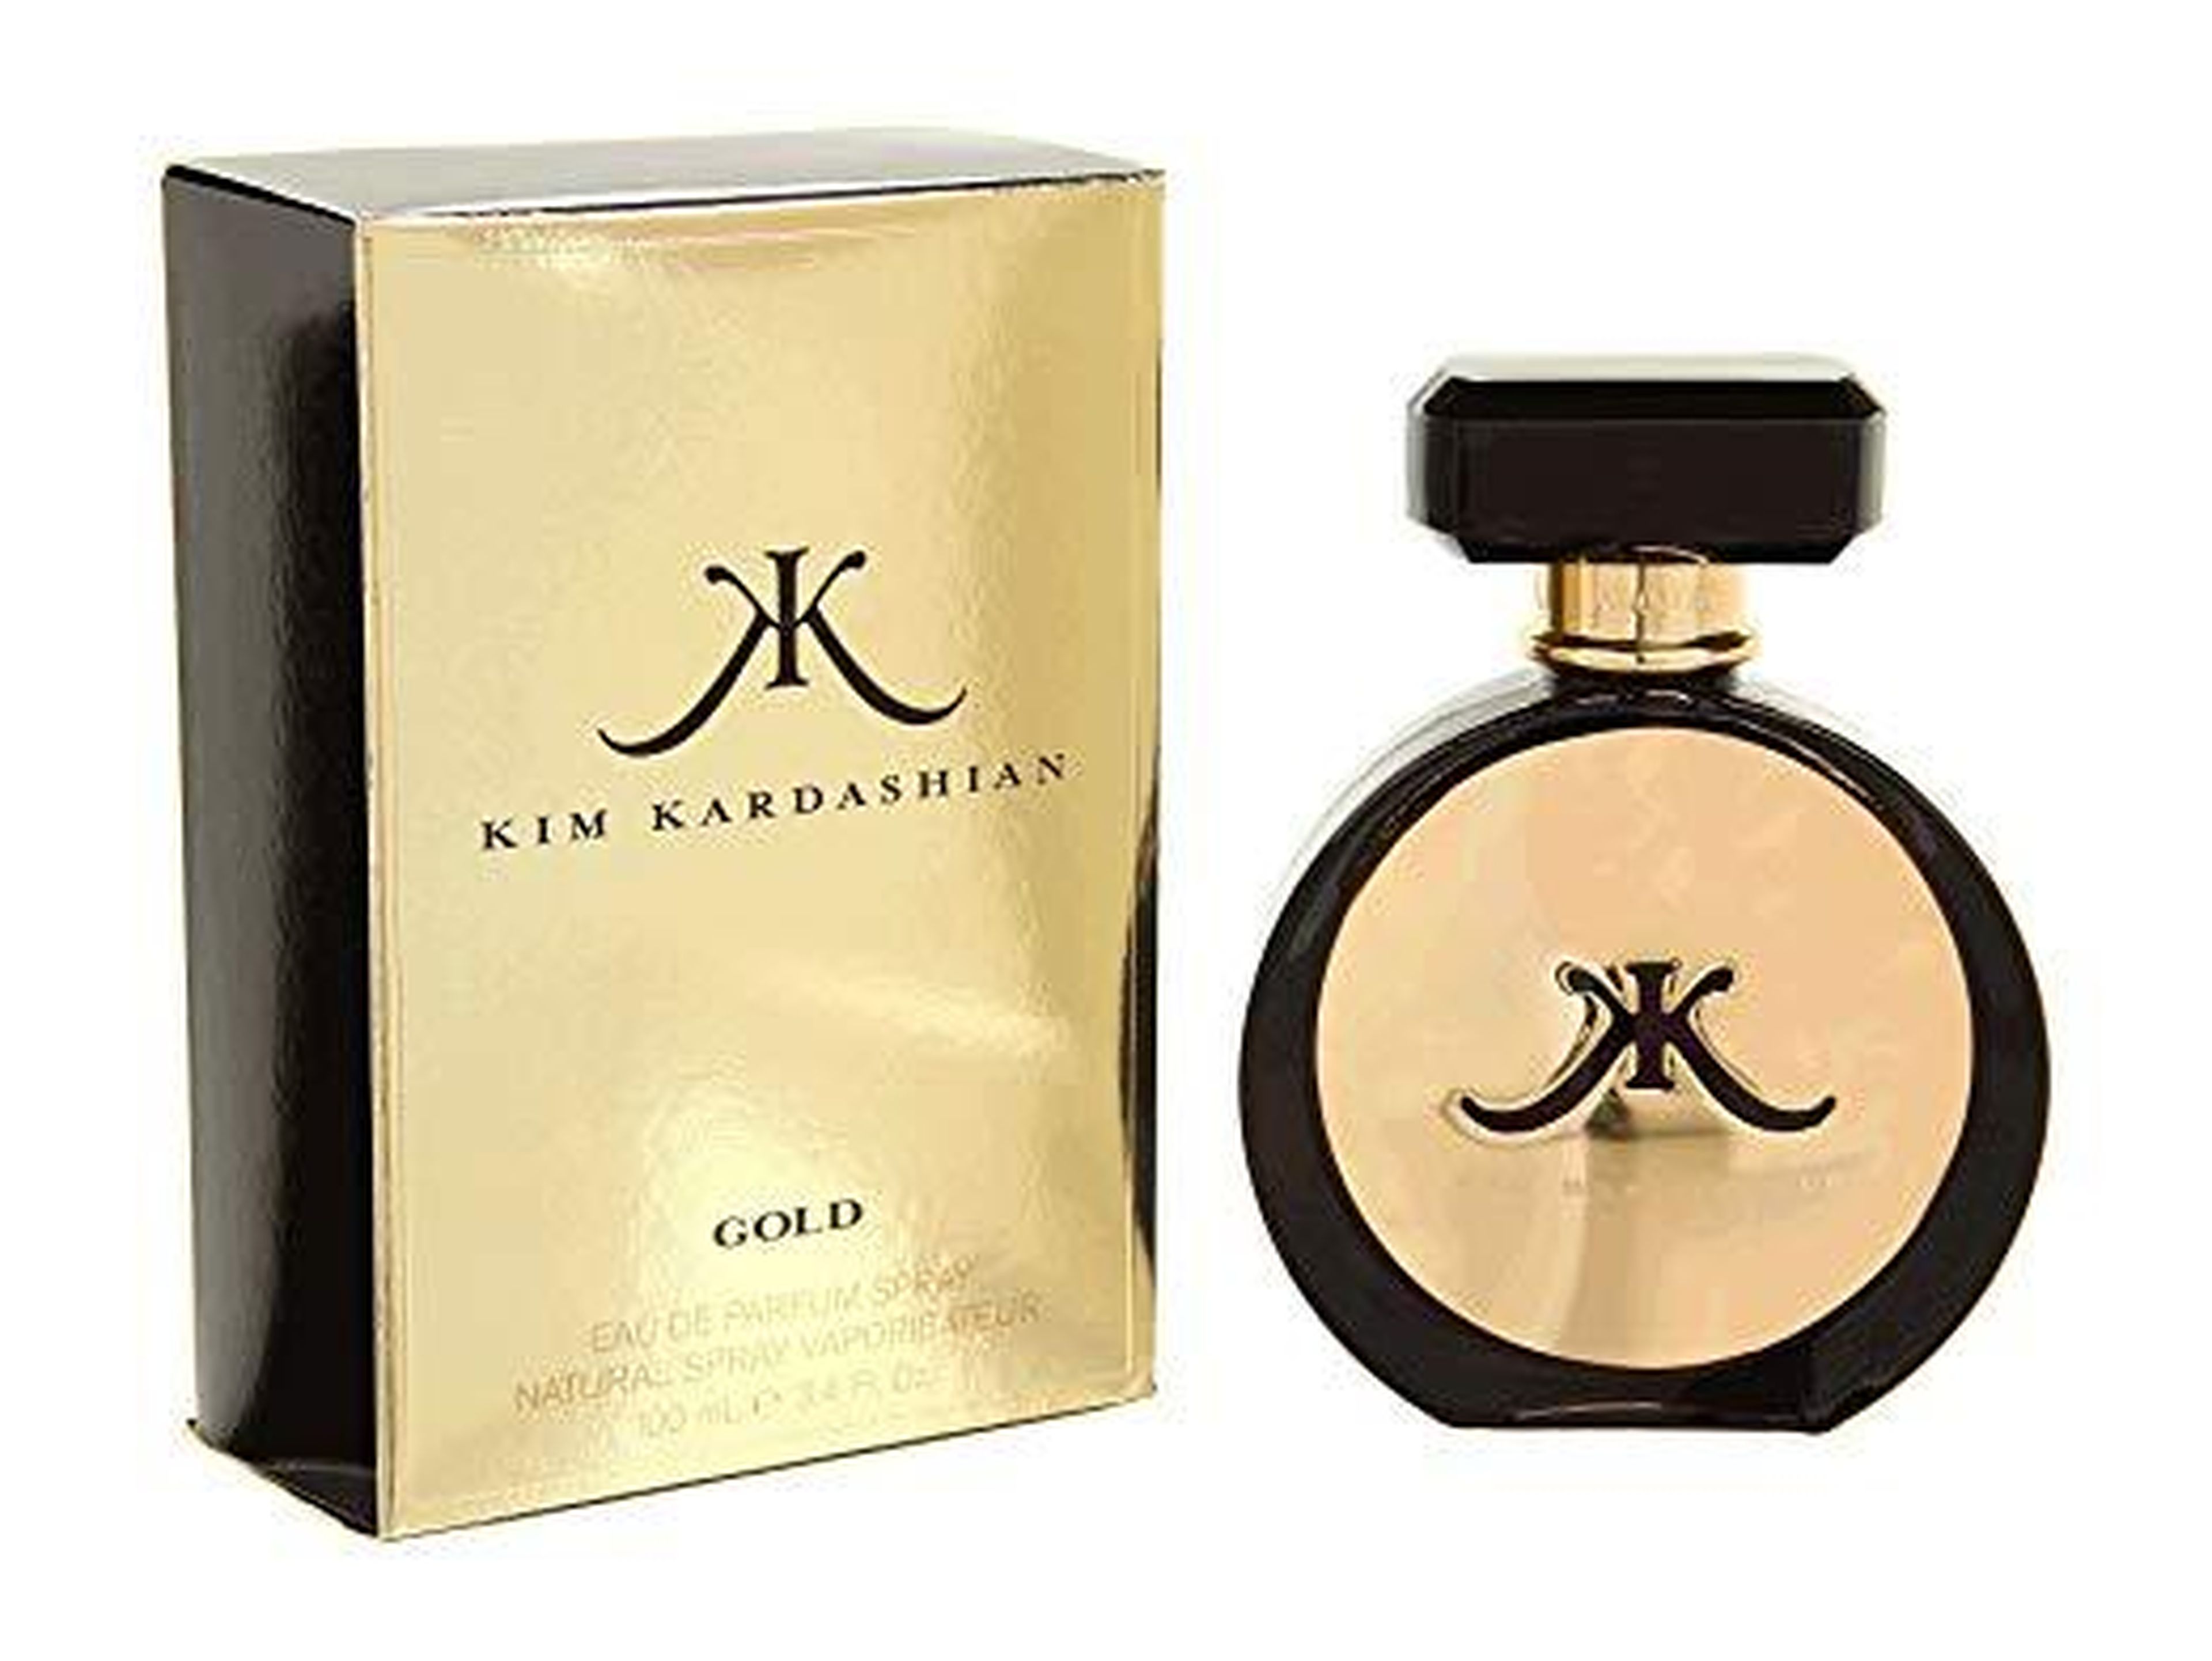 But of course, that wasn't the only thing Kim had going on at the time. In April 2011 she launched Gold, her second fragrance.